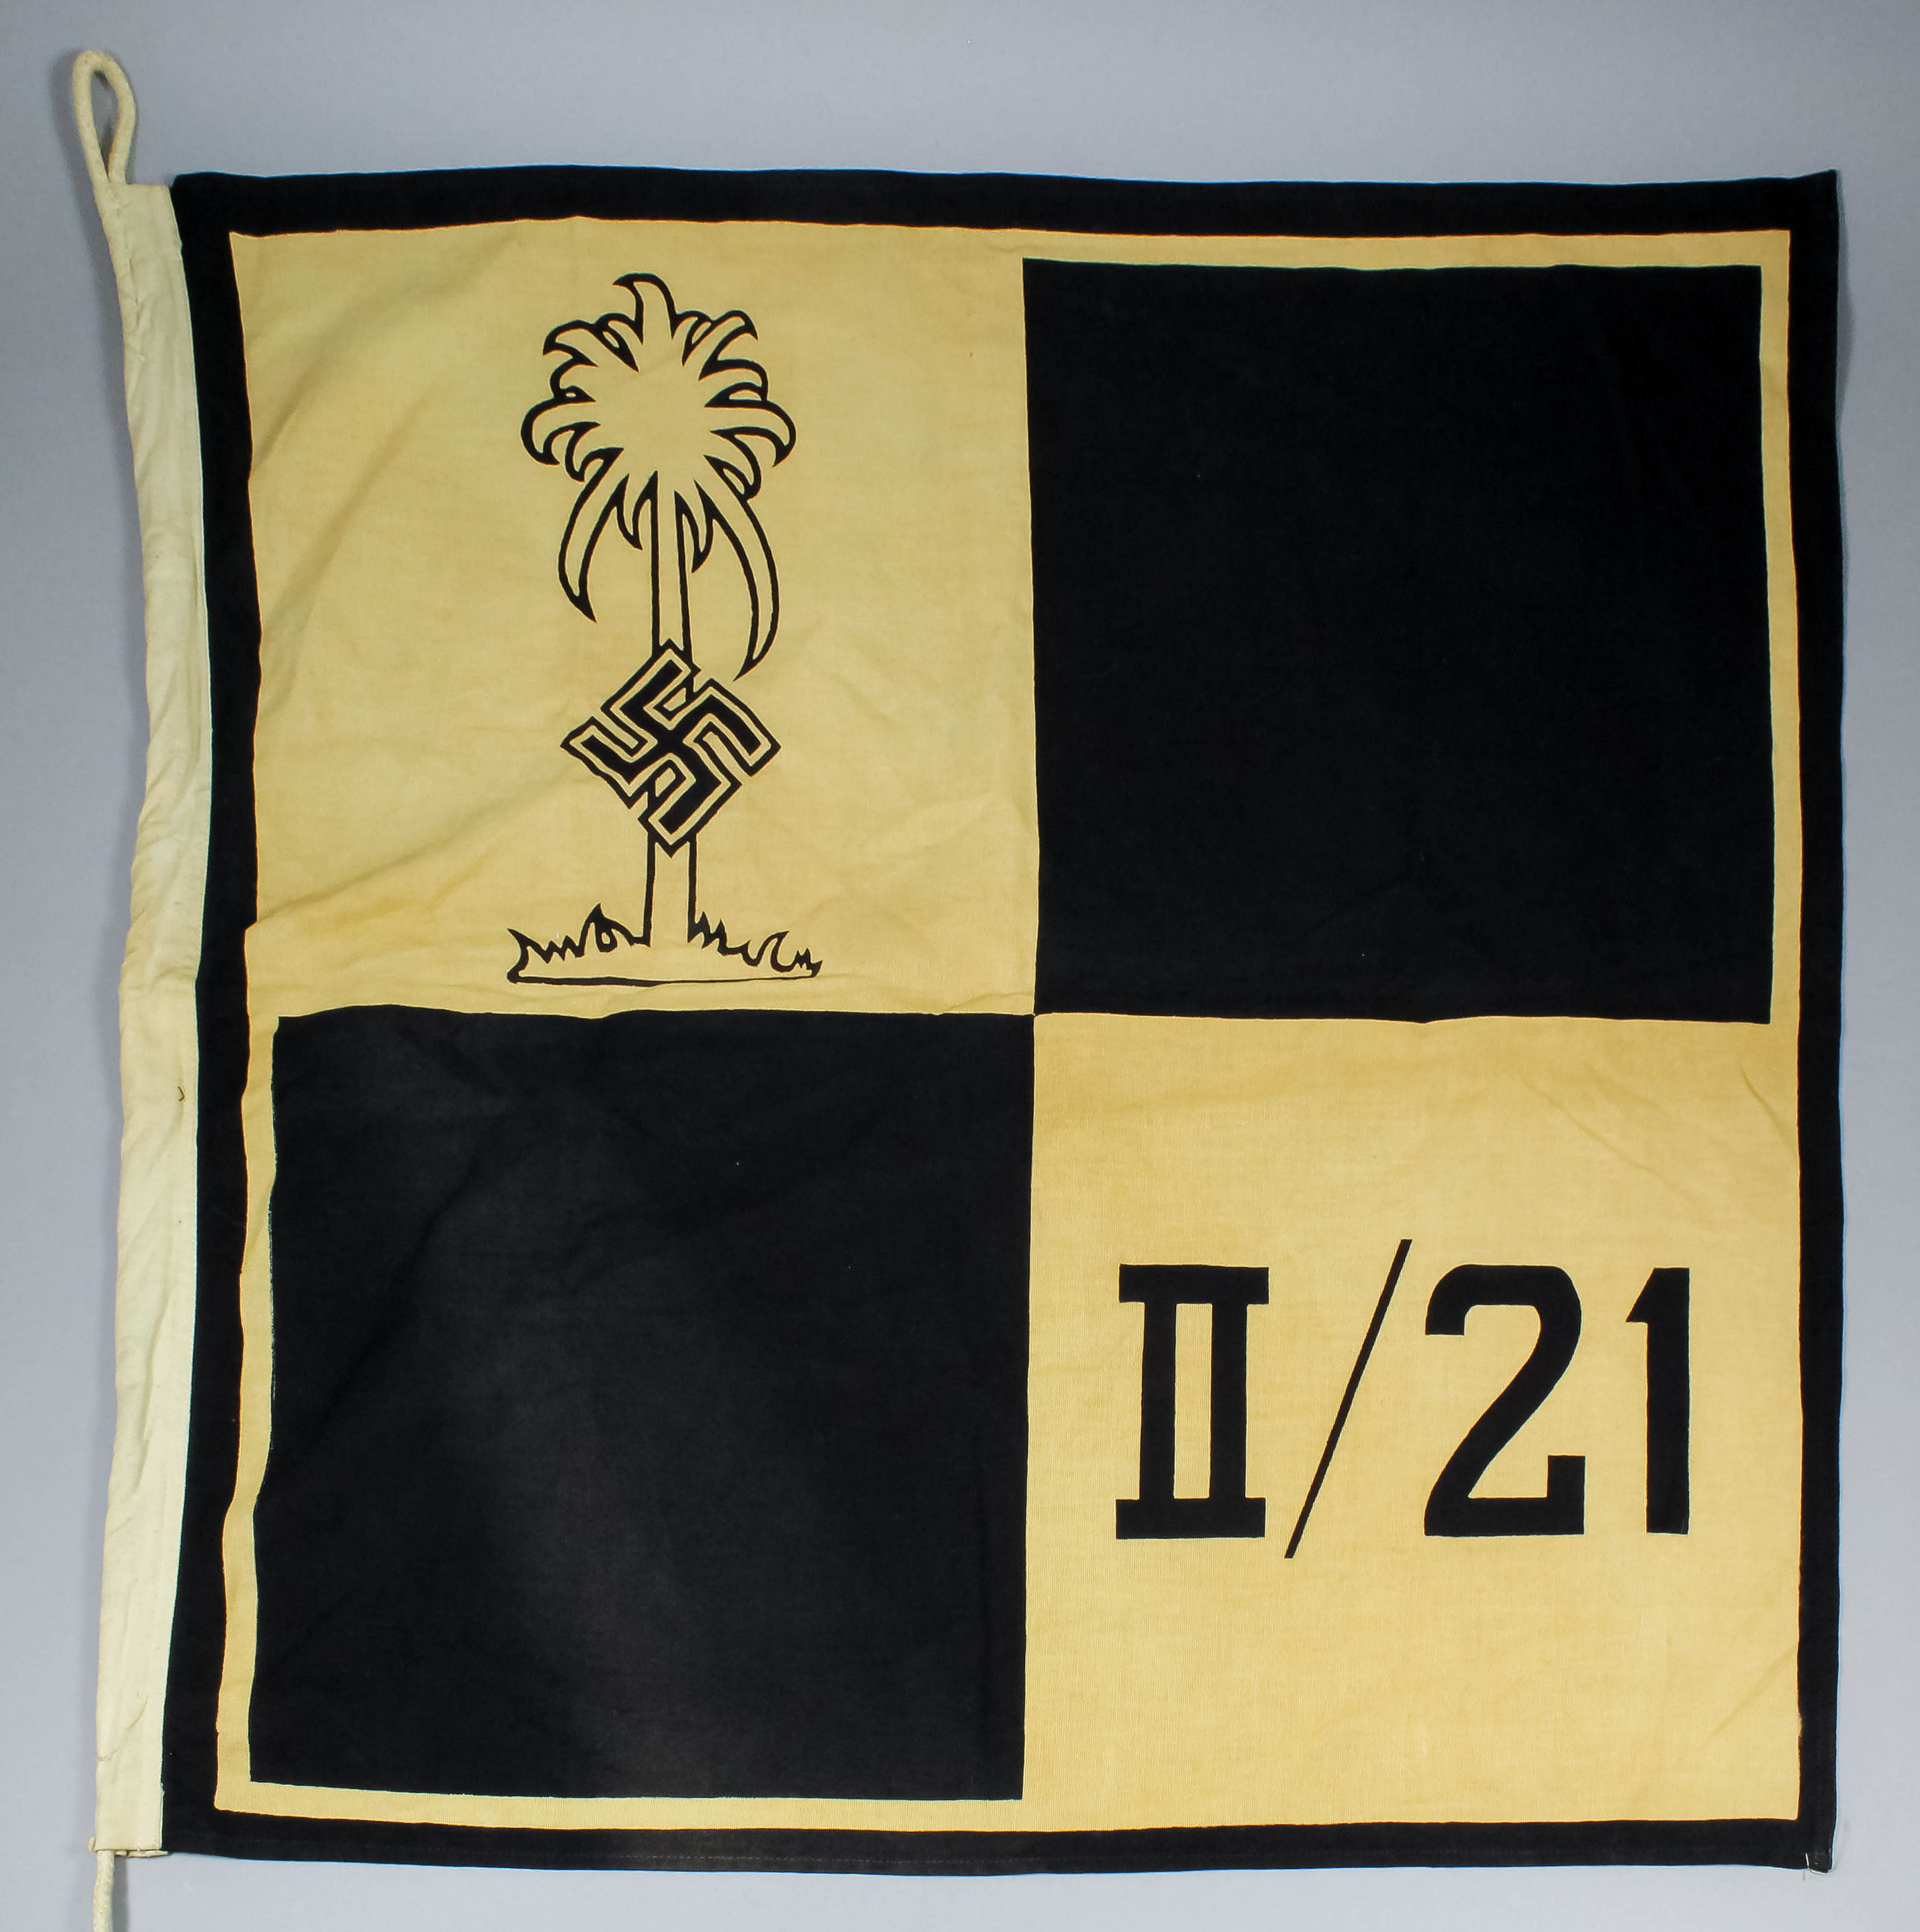 A German World War II Afrika Korps pennant with palm and swastika, II/21, in black and white,